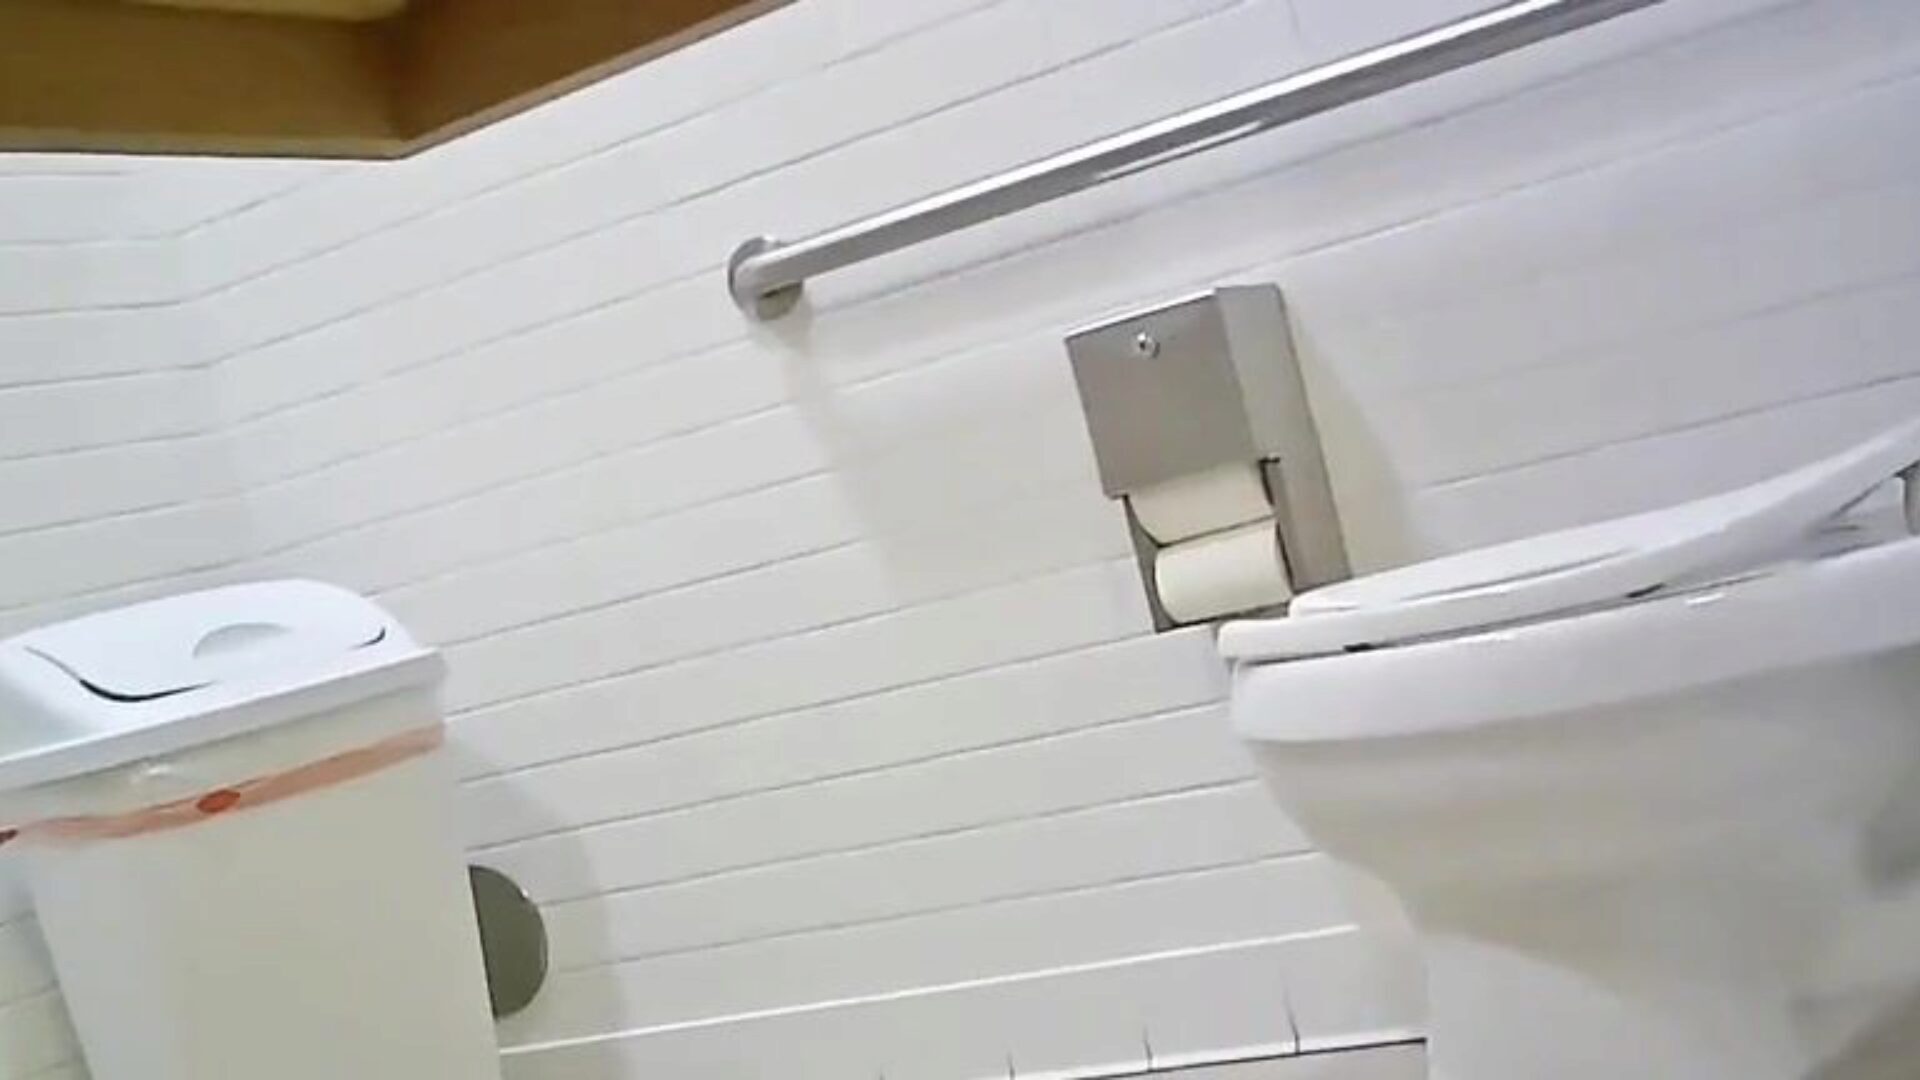 Hidden Toilet Camera- fit hotty ideal gazoo Check this one out, tell me what you think ;P’